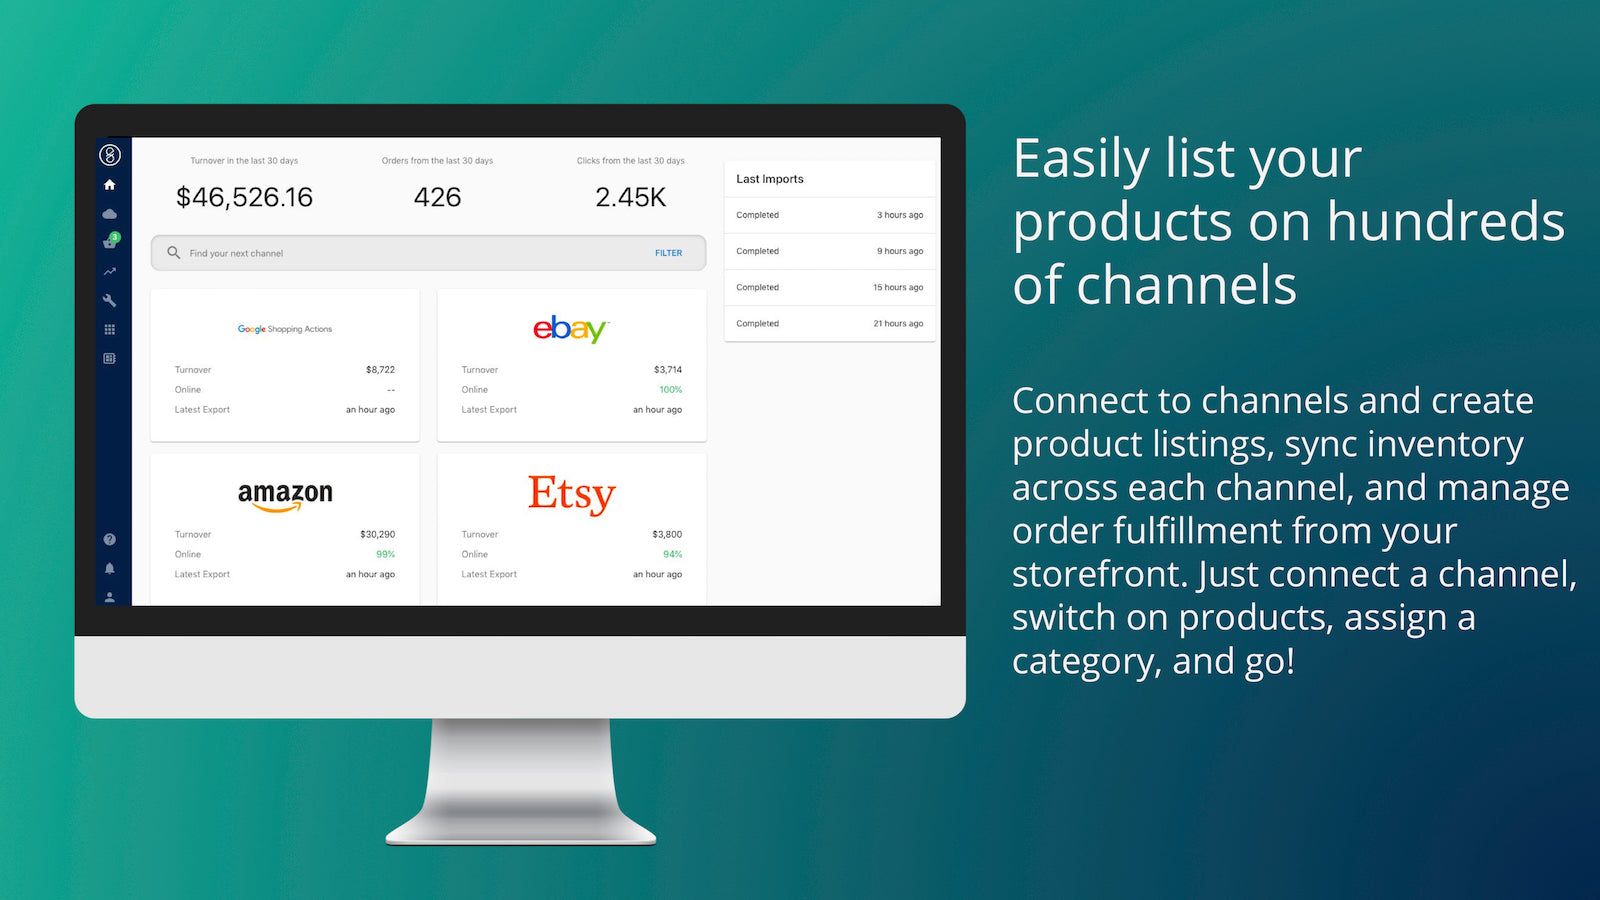 Manage all your channels from one simple dashboard.